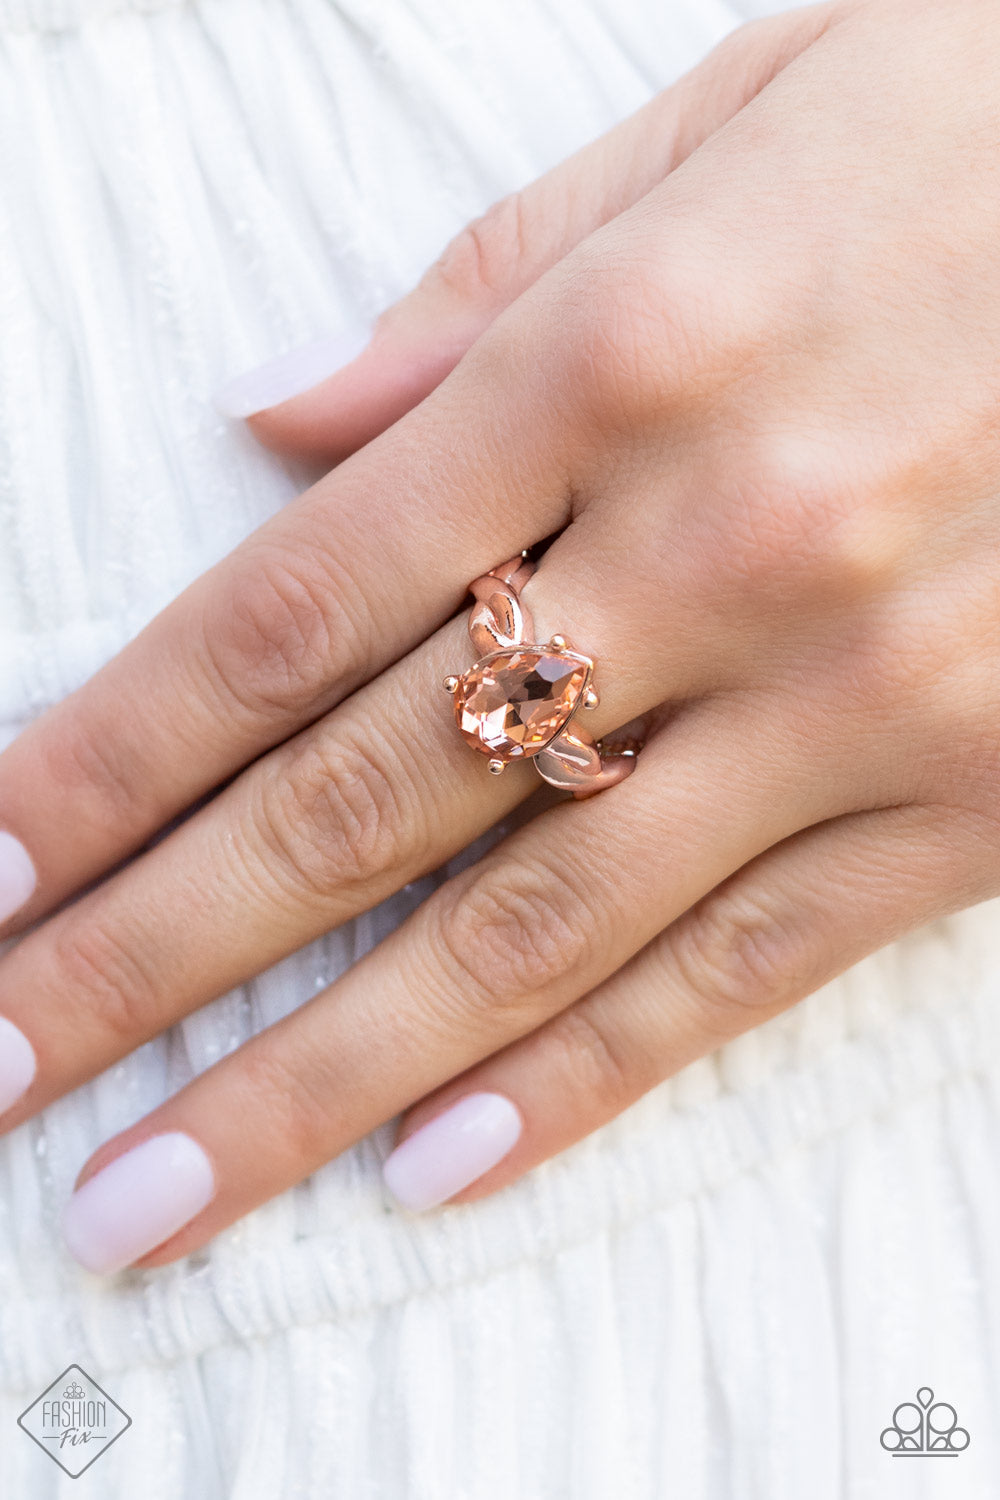 Law of Attraction - Rose Gold ring